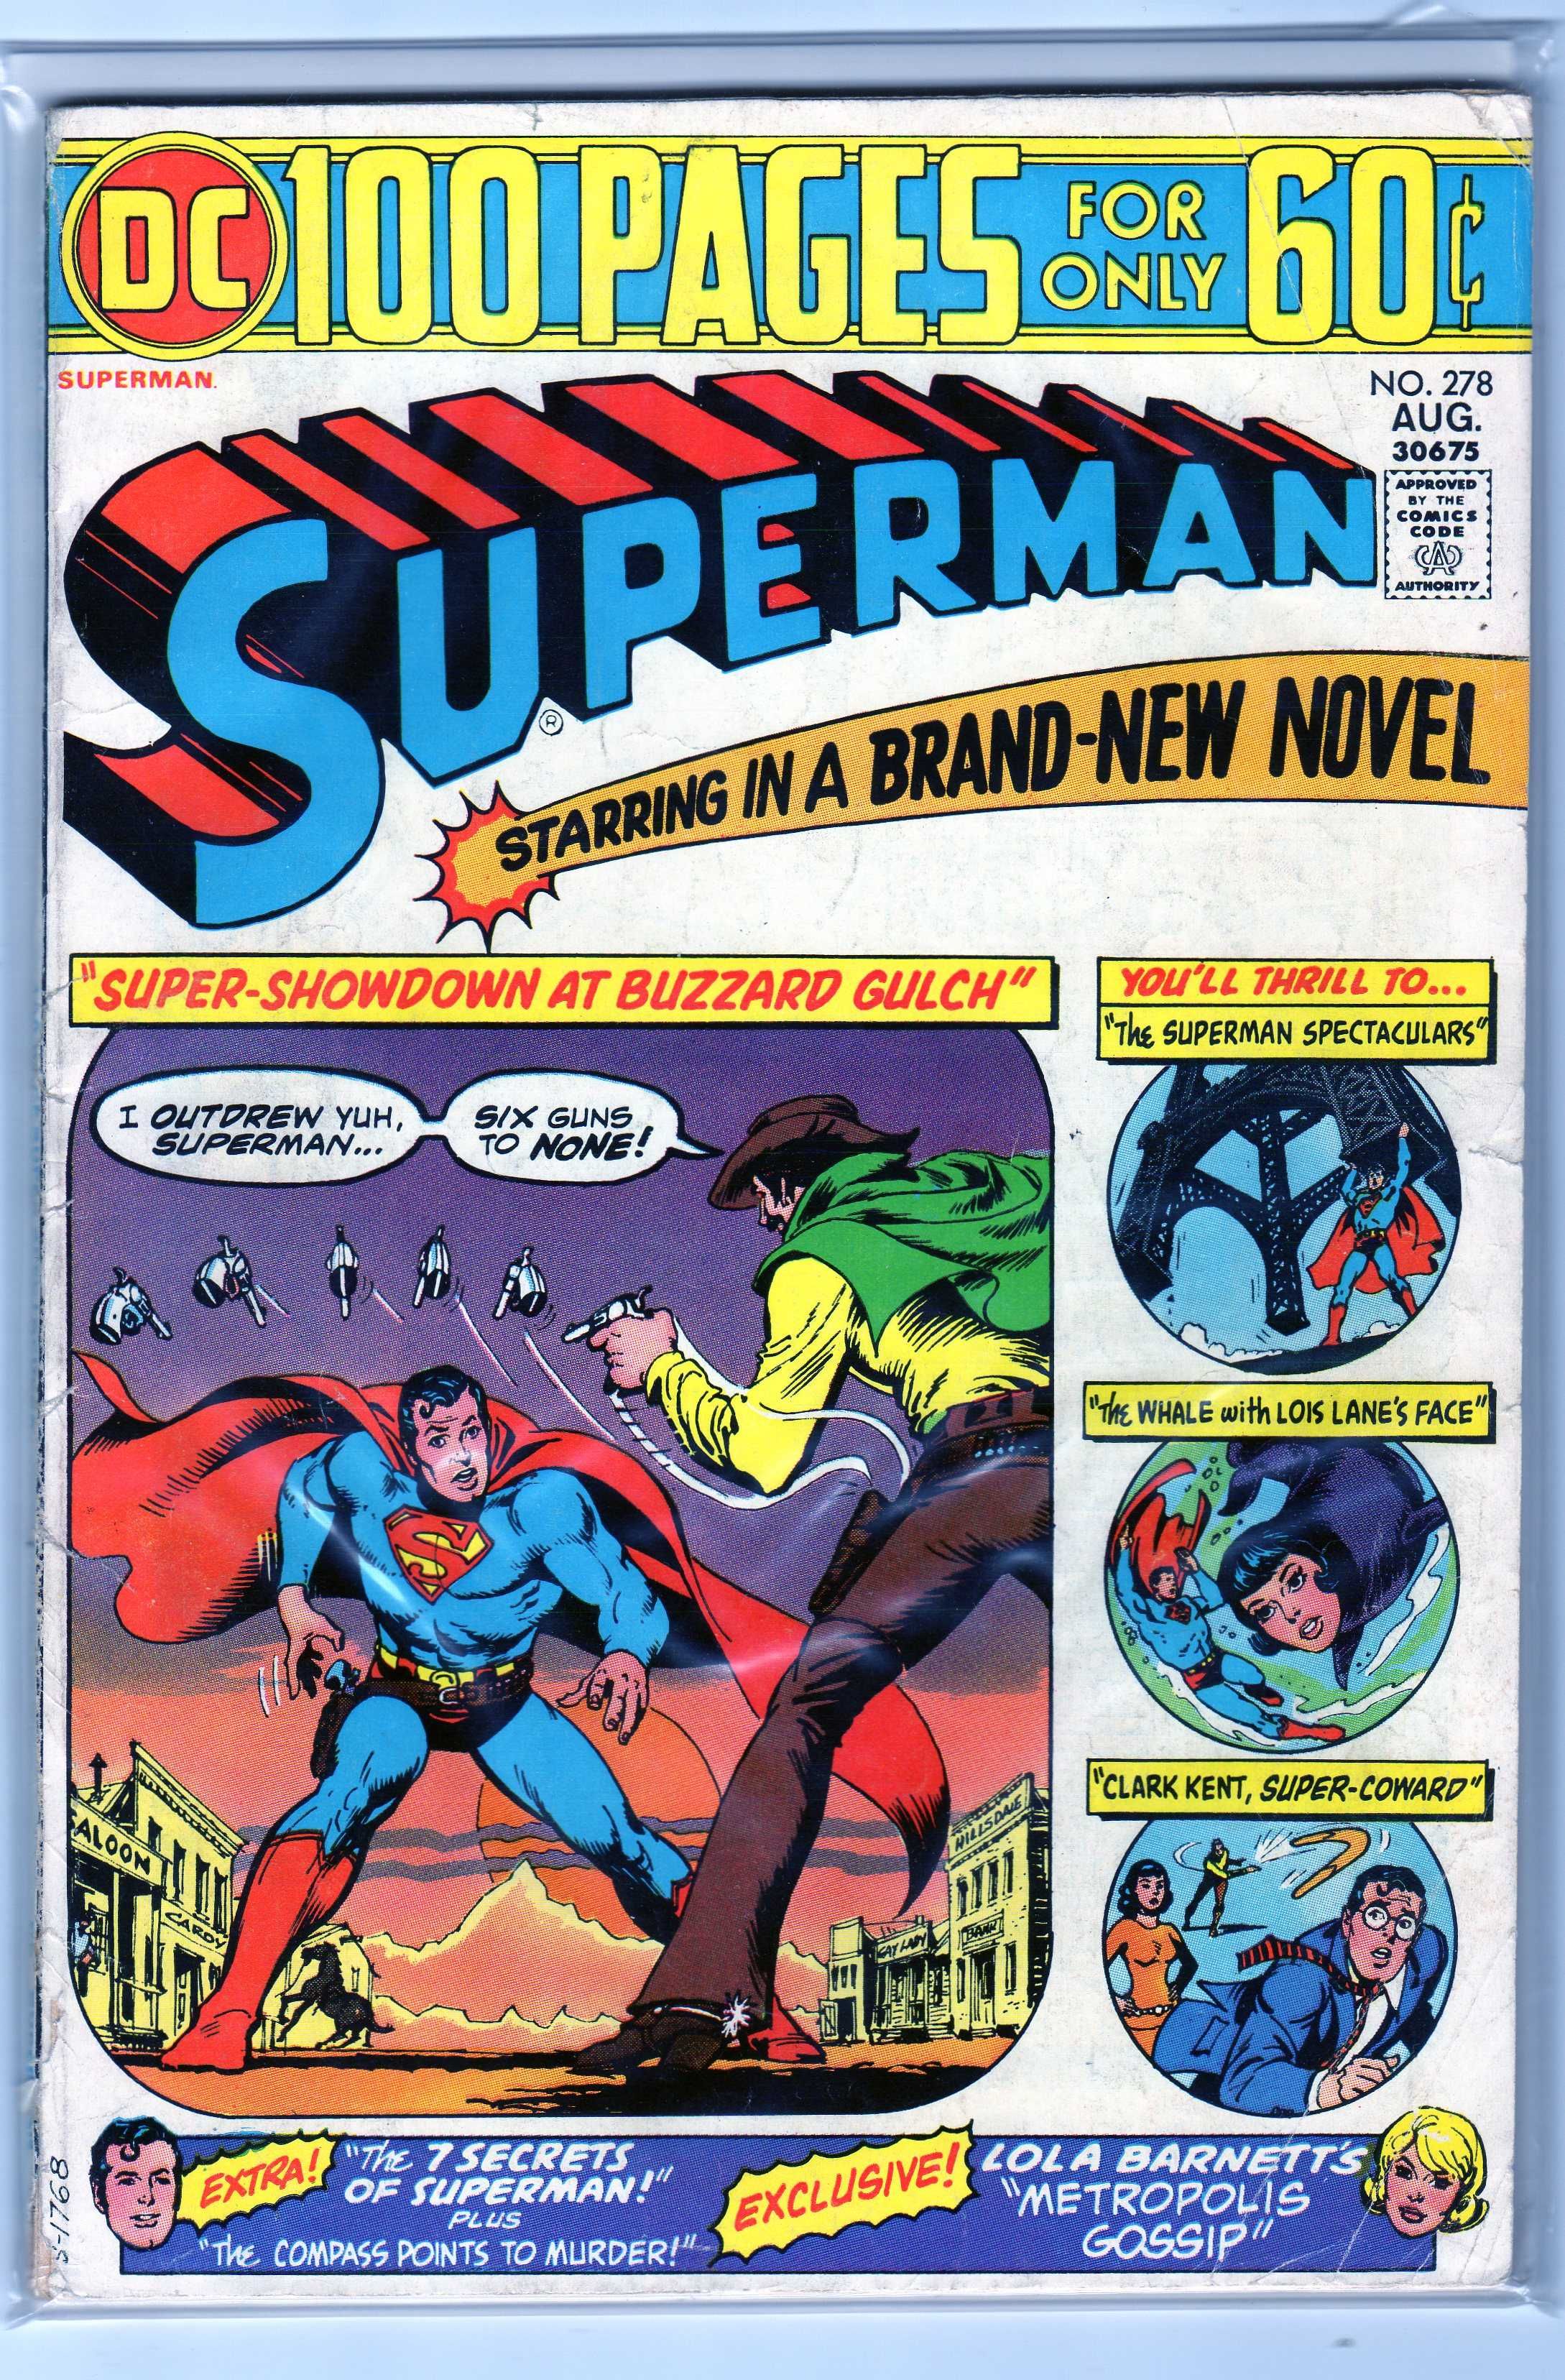 Superman #278 Nick Cardy Cover Art 100 Page Super Spectacular 1974